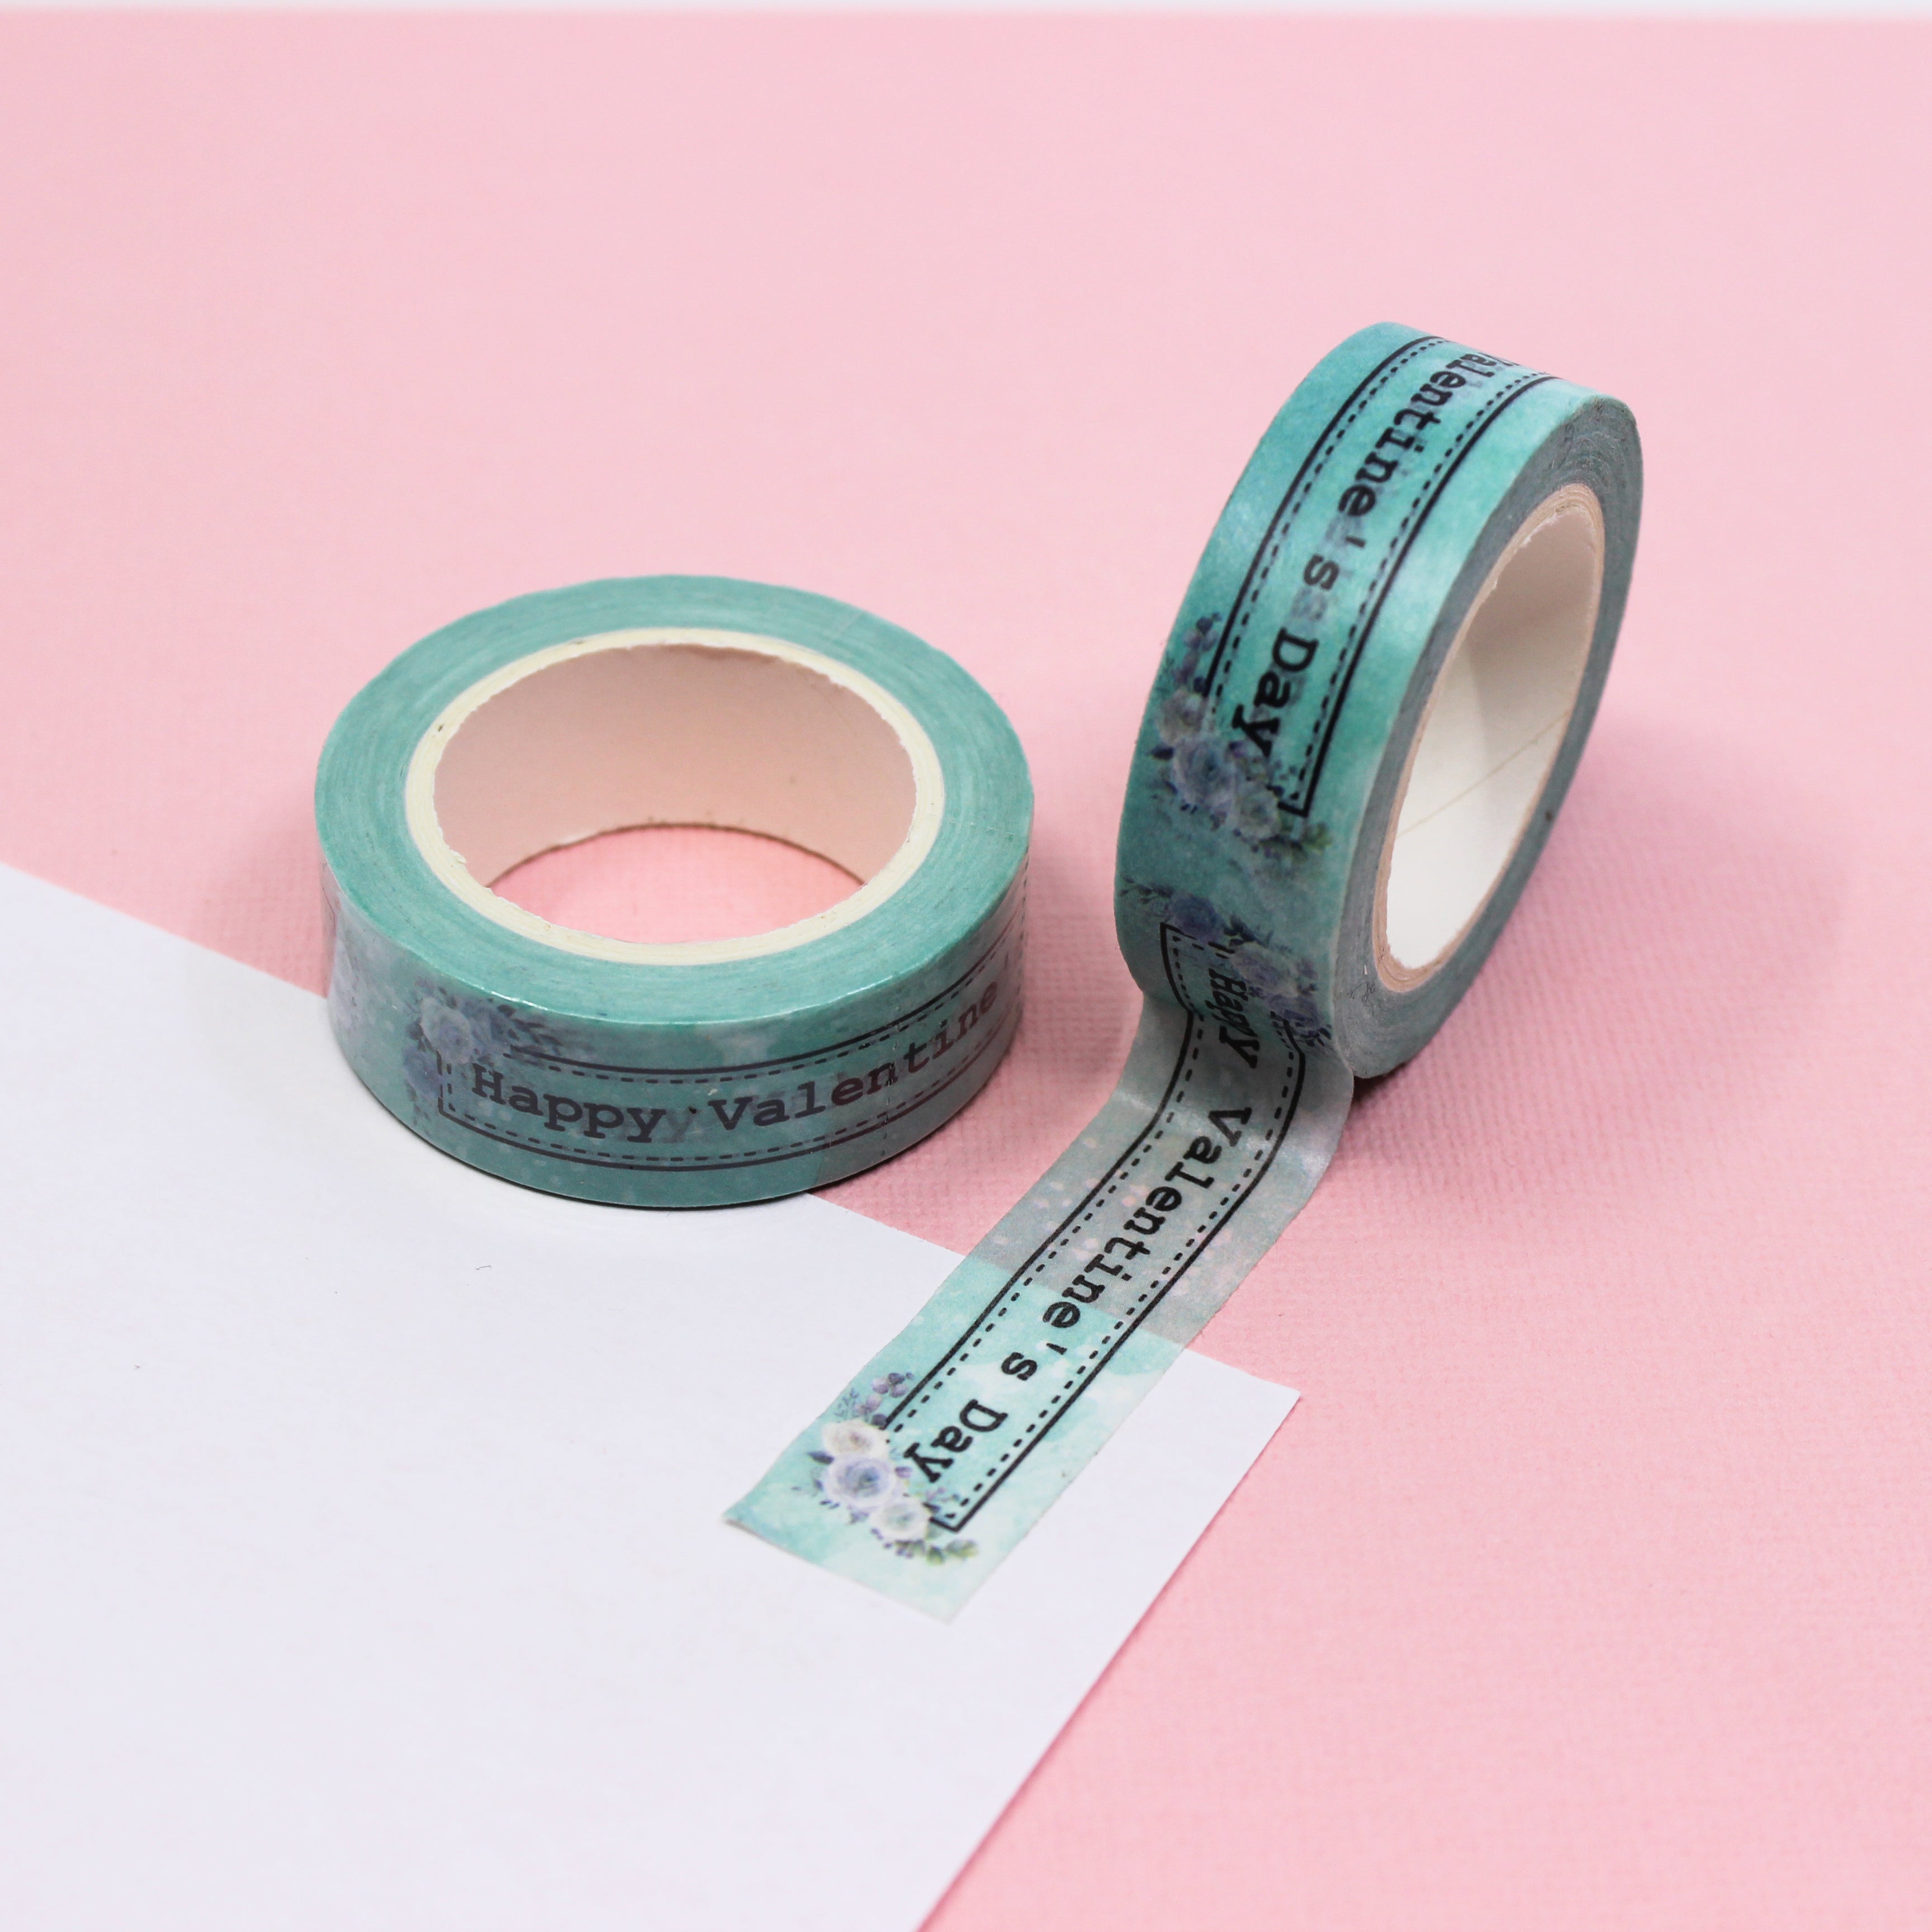 This blue 'Happy Valentine's Day Typogrpahy Text Washi tape is perfect for adding the message of the holiday to your borders and craft projects. This tape is sold at BBB Supplies Craft Shop.